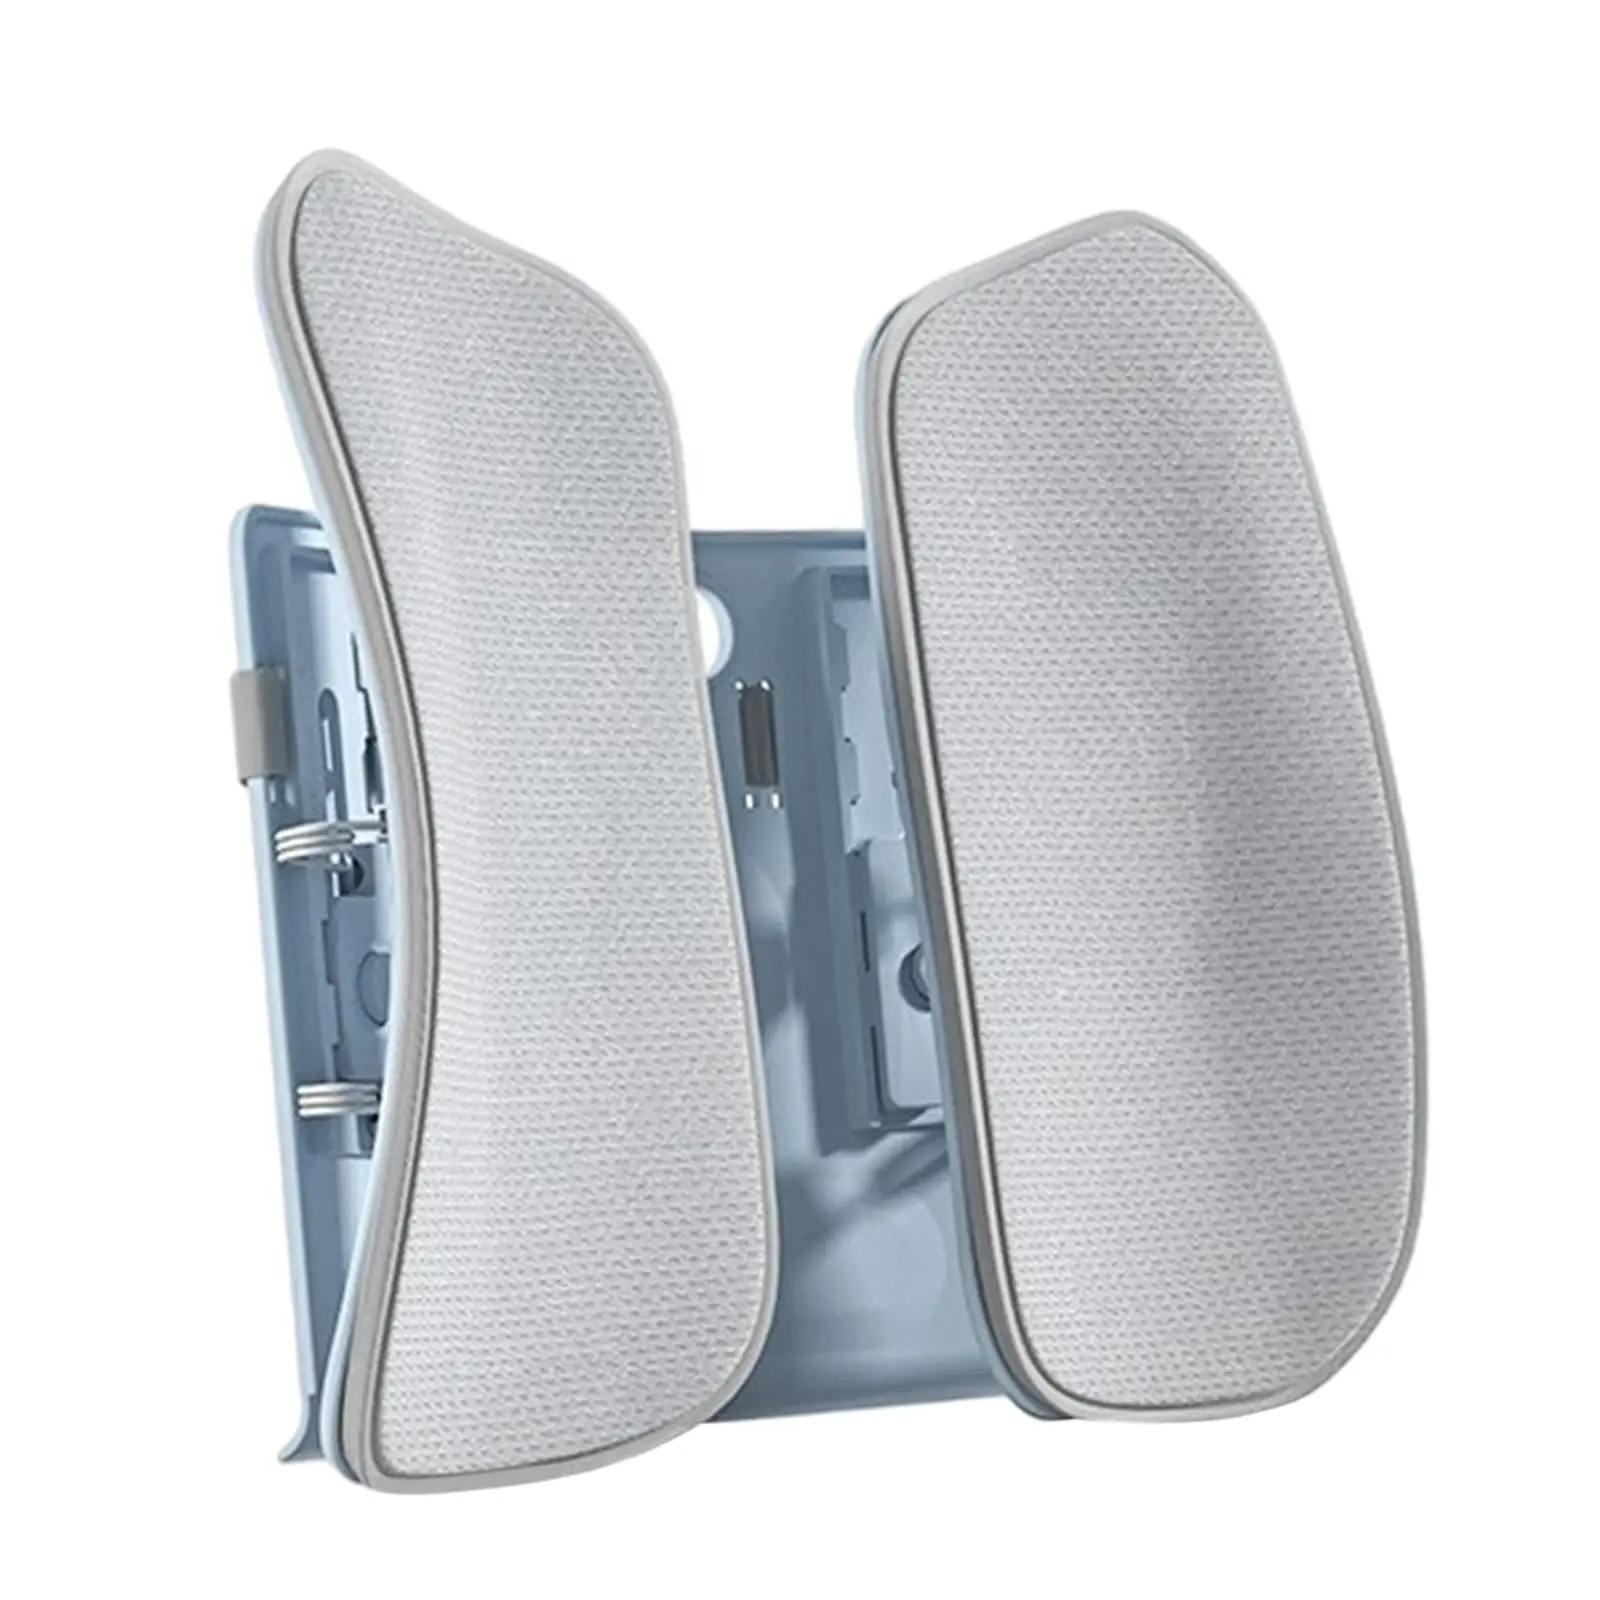 Back Support Seat Cushion,Ergonomic Back Chair Pillow,Breathable Mesh Chair Pad